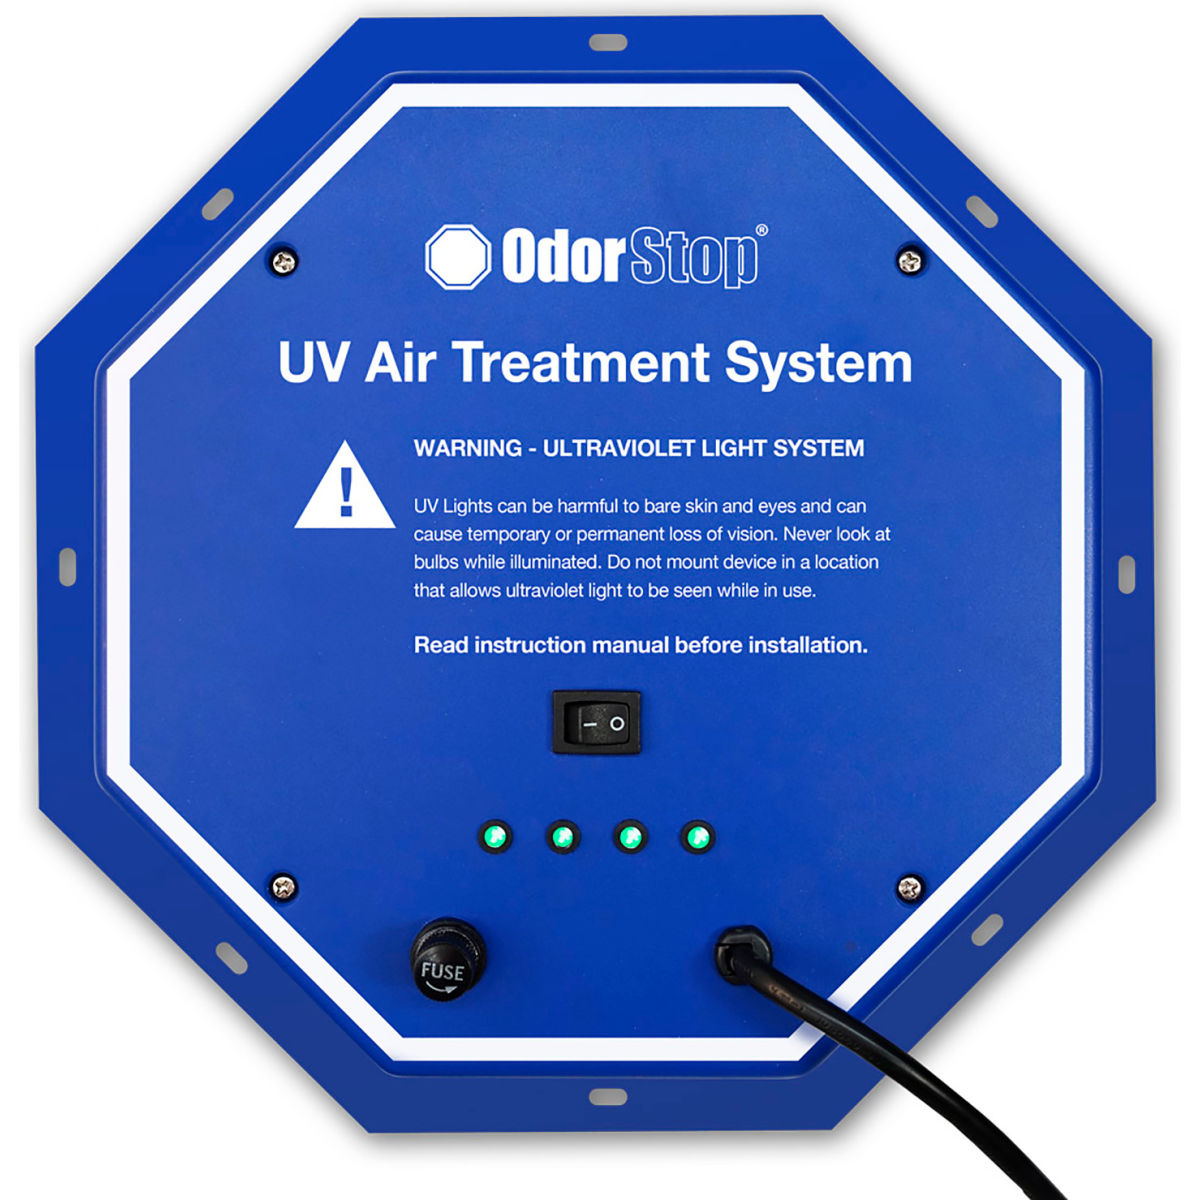 Picture of OdorStop B2353754 36 watts UV Air Treatment System with Airflow Sensor & 16 in. Bulb